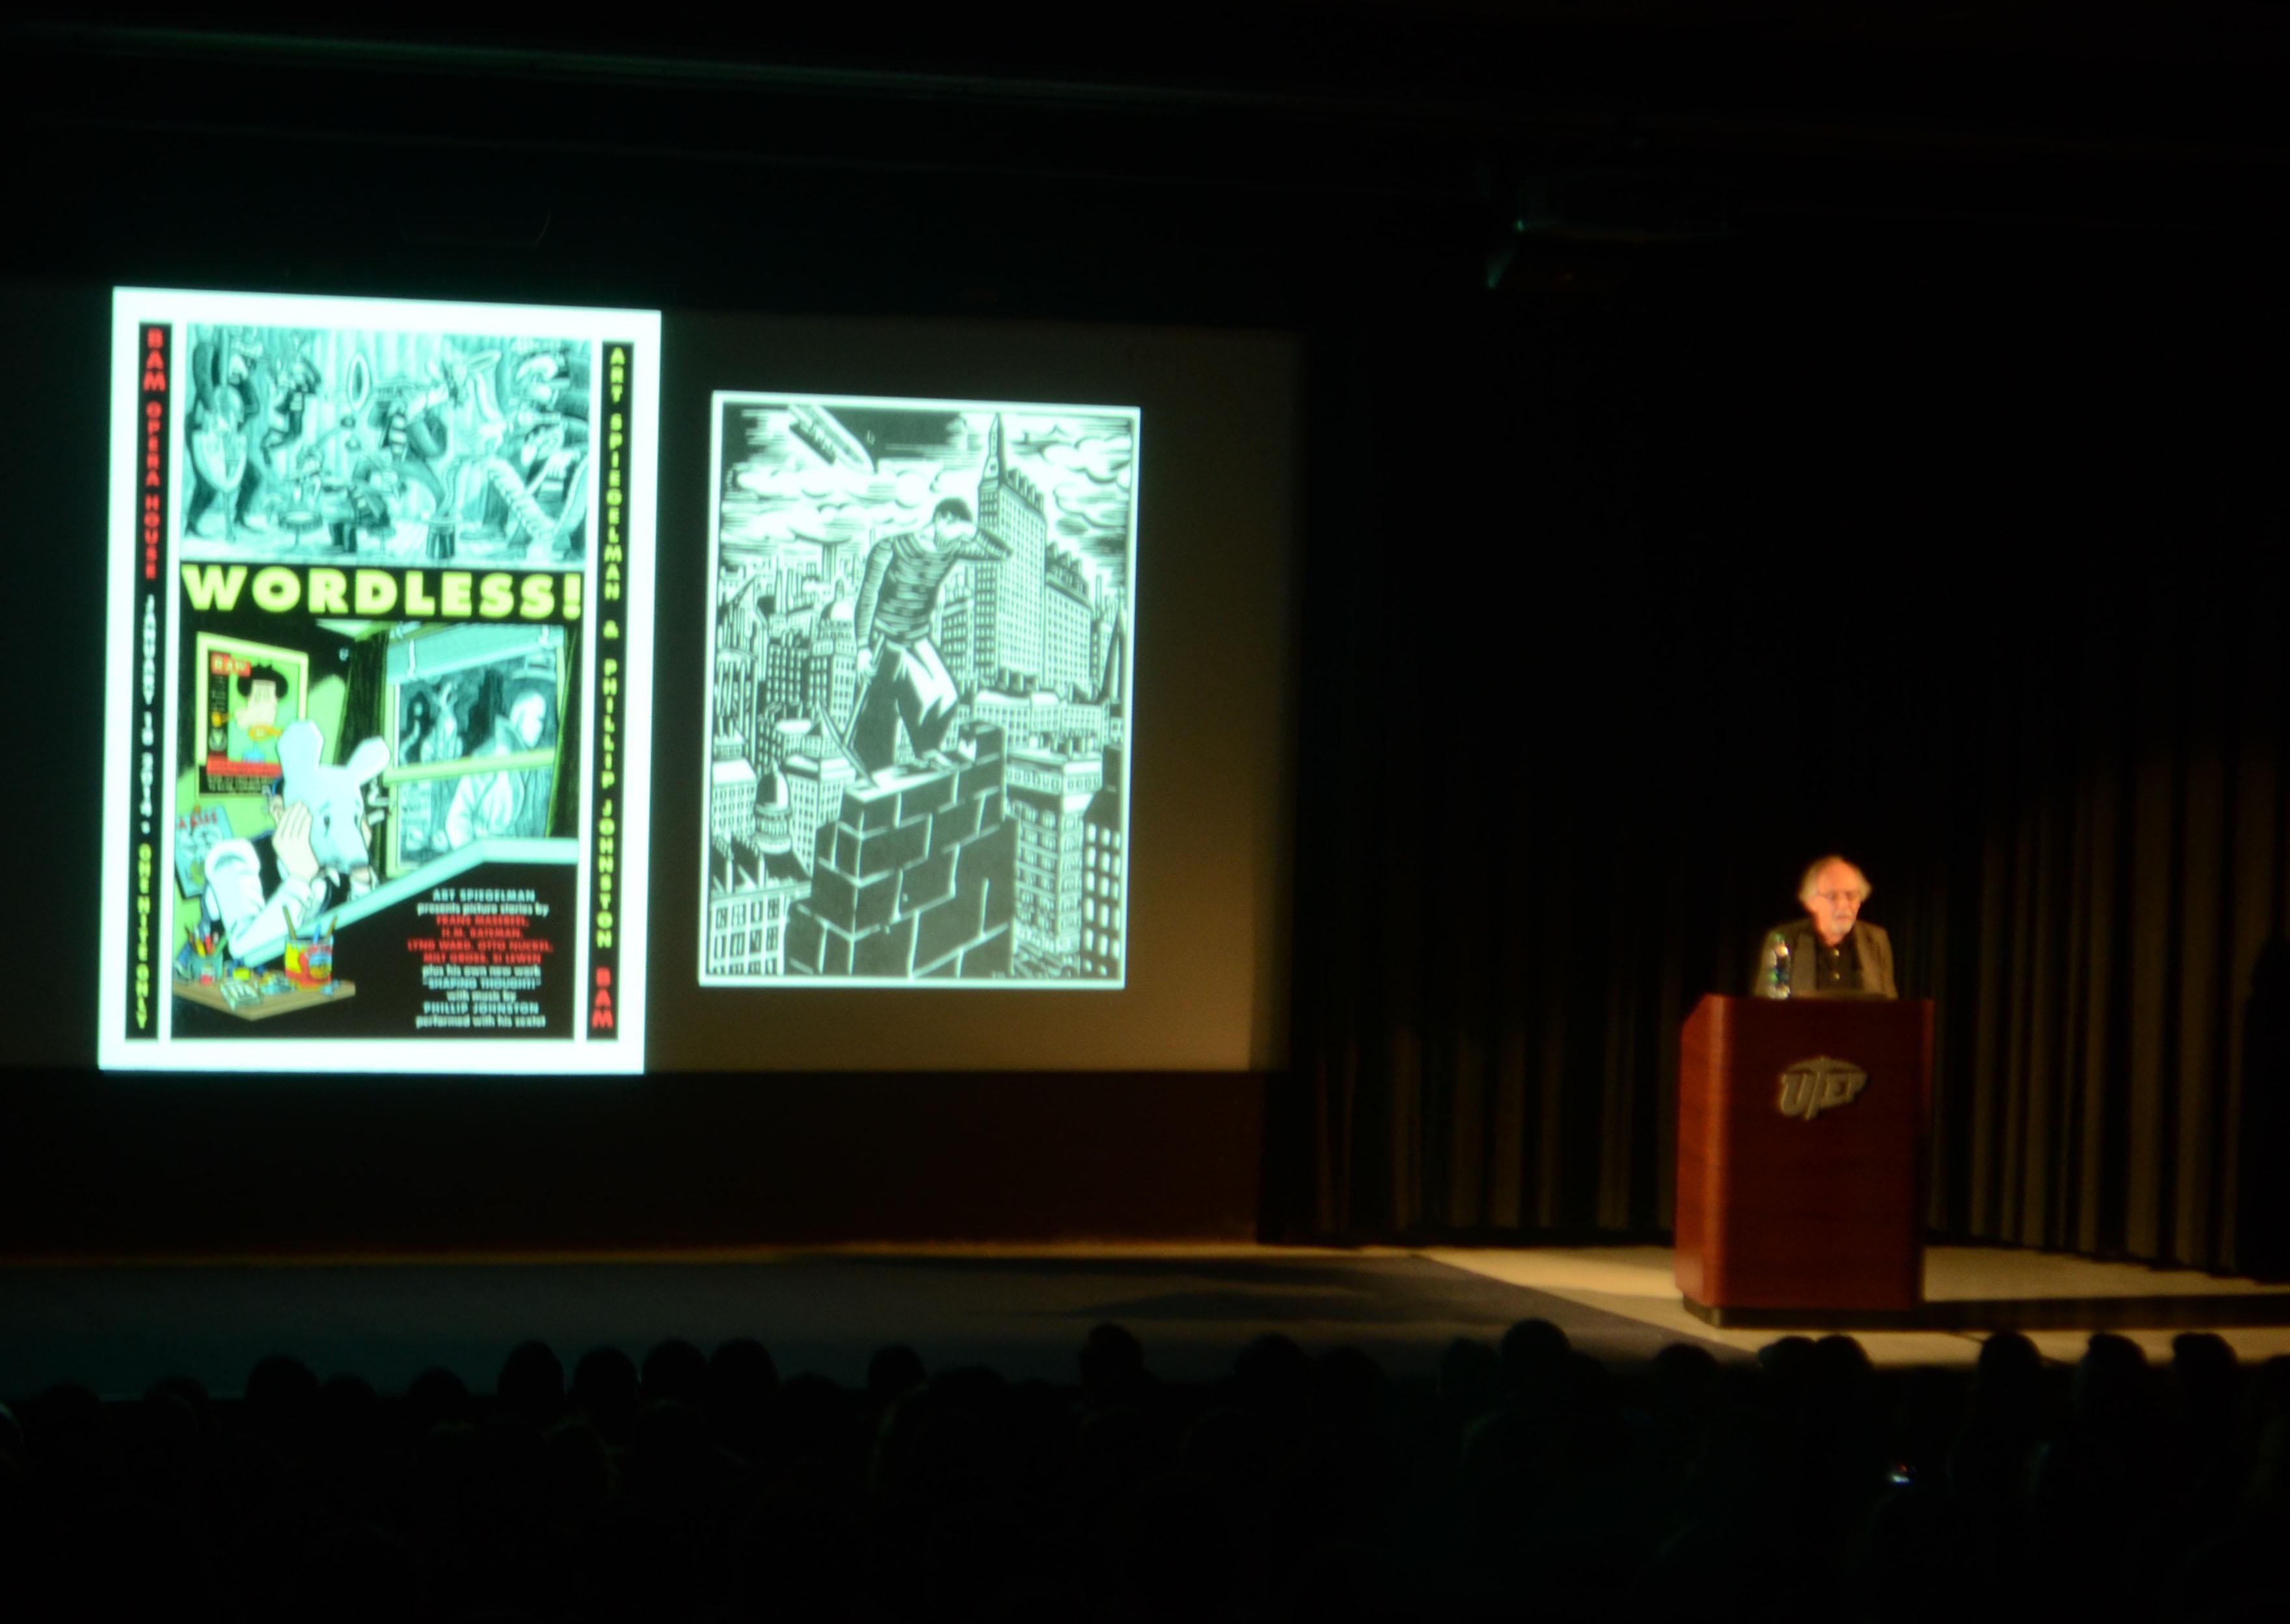 Graphic+novelist+Art+Speigelman+gives+lecture+on+comic+books%2C+influences+on+Maus